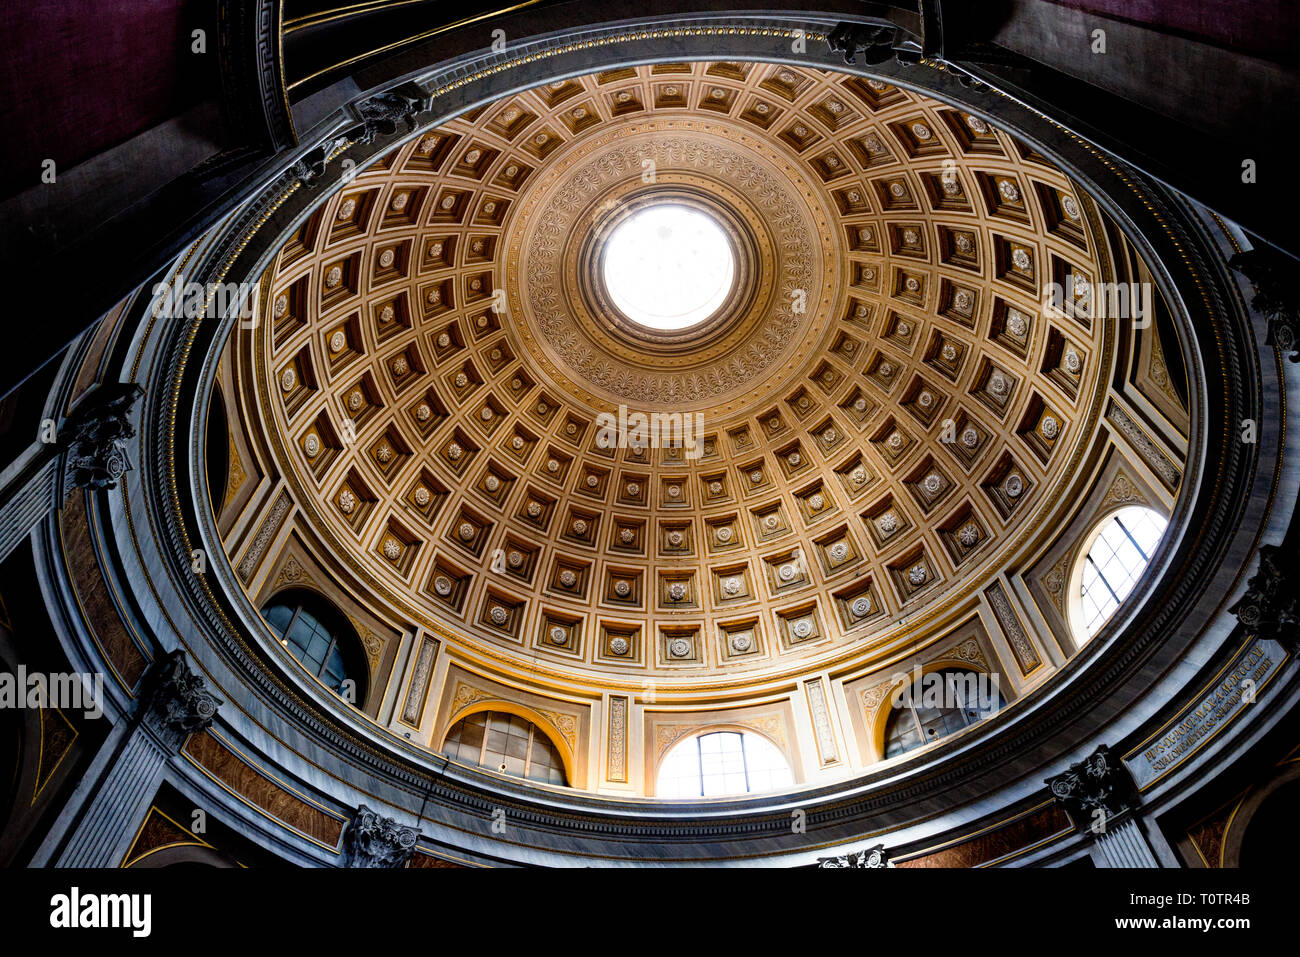 Hemispherical vault of the Round Hall at the Vatican Museum in Rome, Italy. Stock Photo